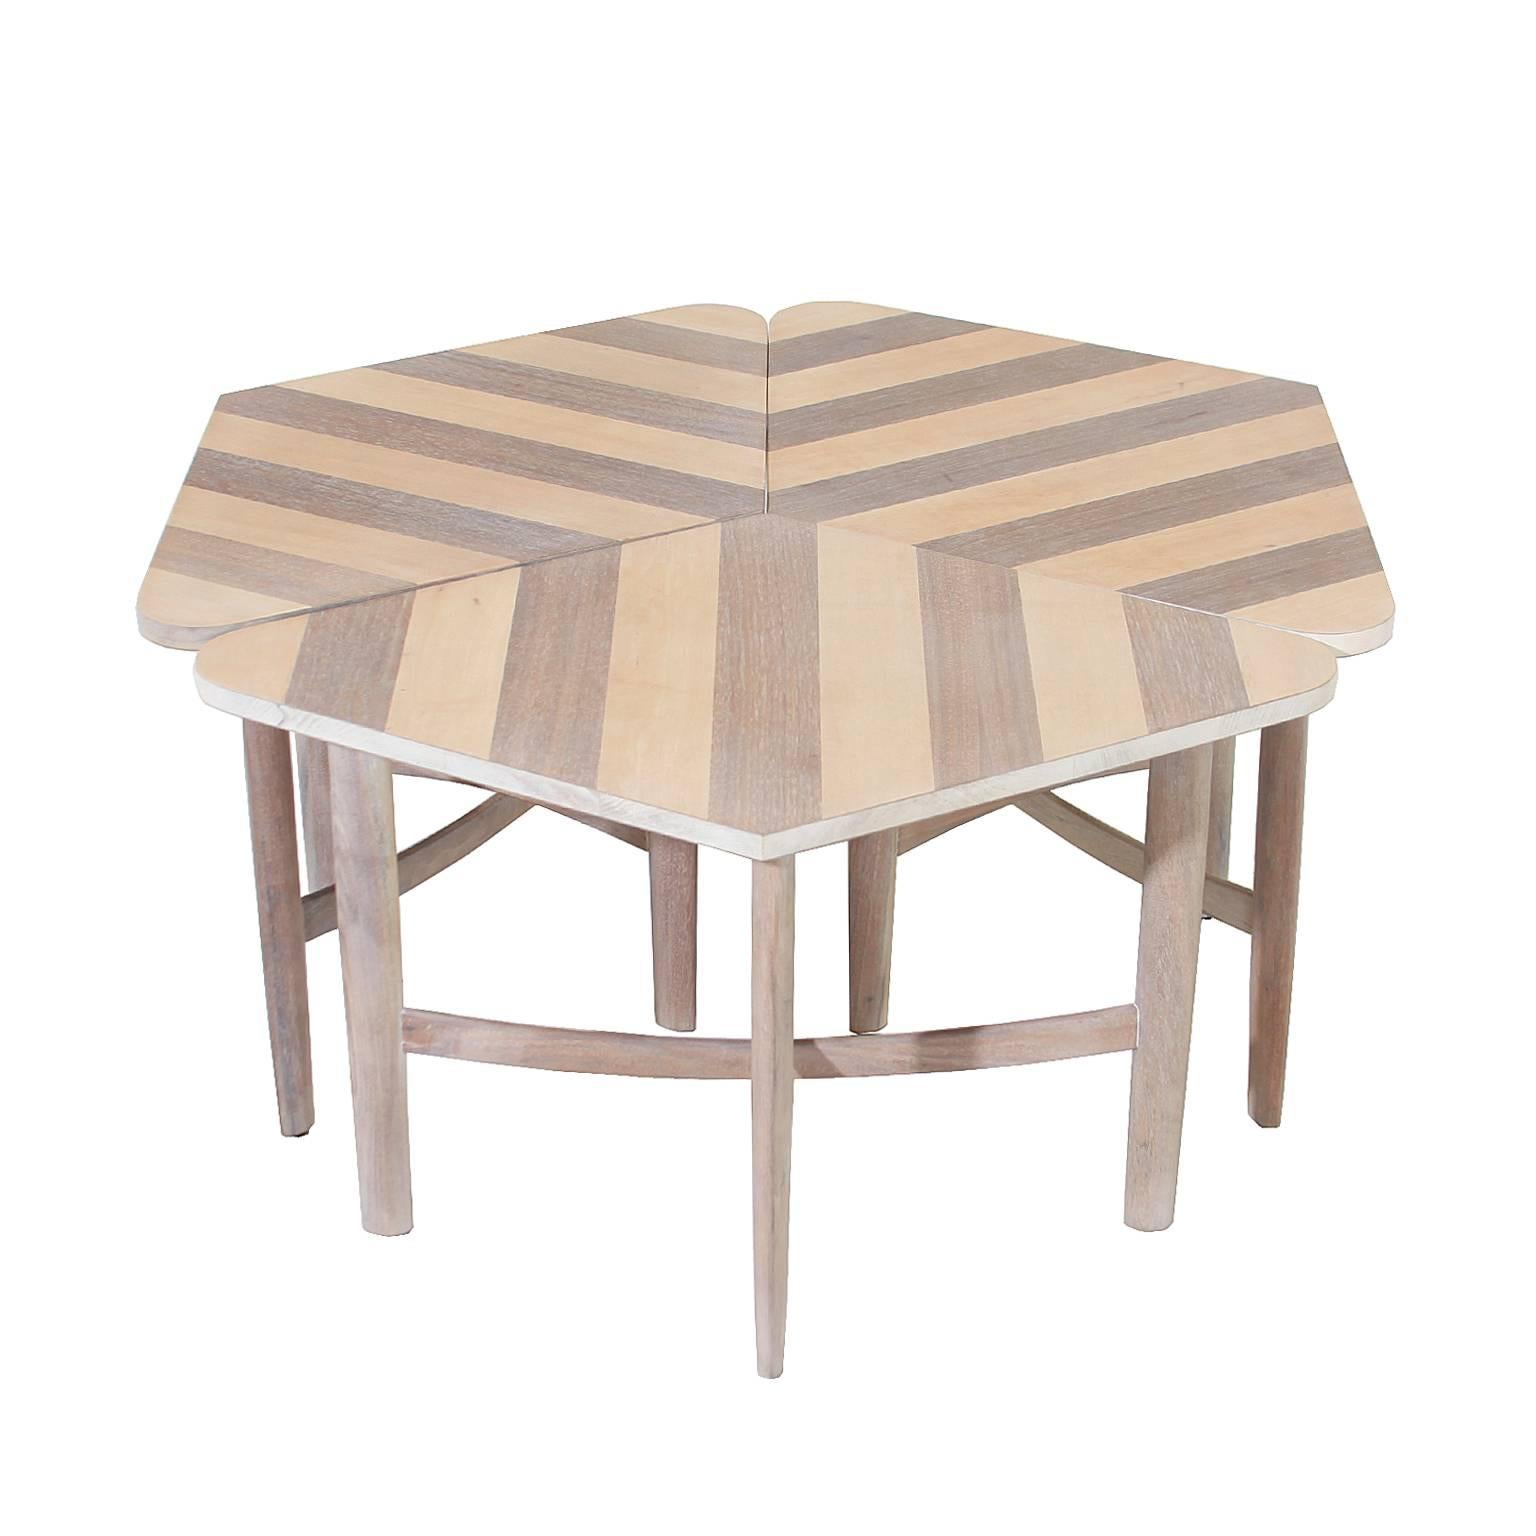 A beautiful set of three side tables by Drexler. The tables are made of solid birch and have a bleached and blanched oil finish. 

Many pieces are stored in our warehouse, so please click on Contact Dealer button under our logo below to find out if